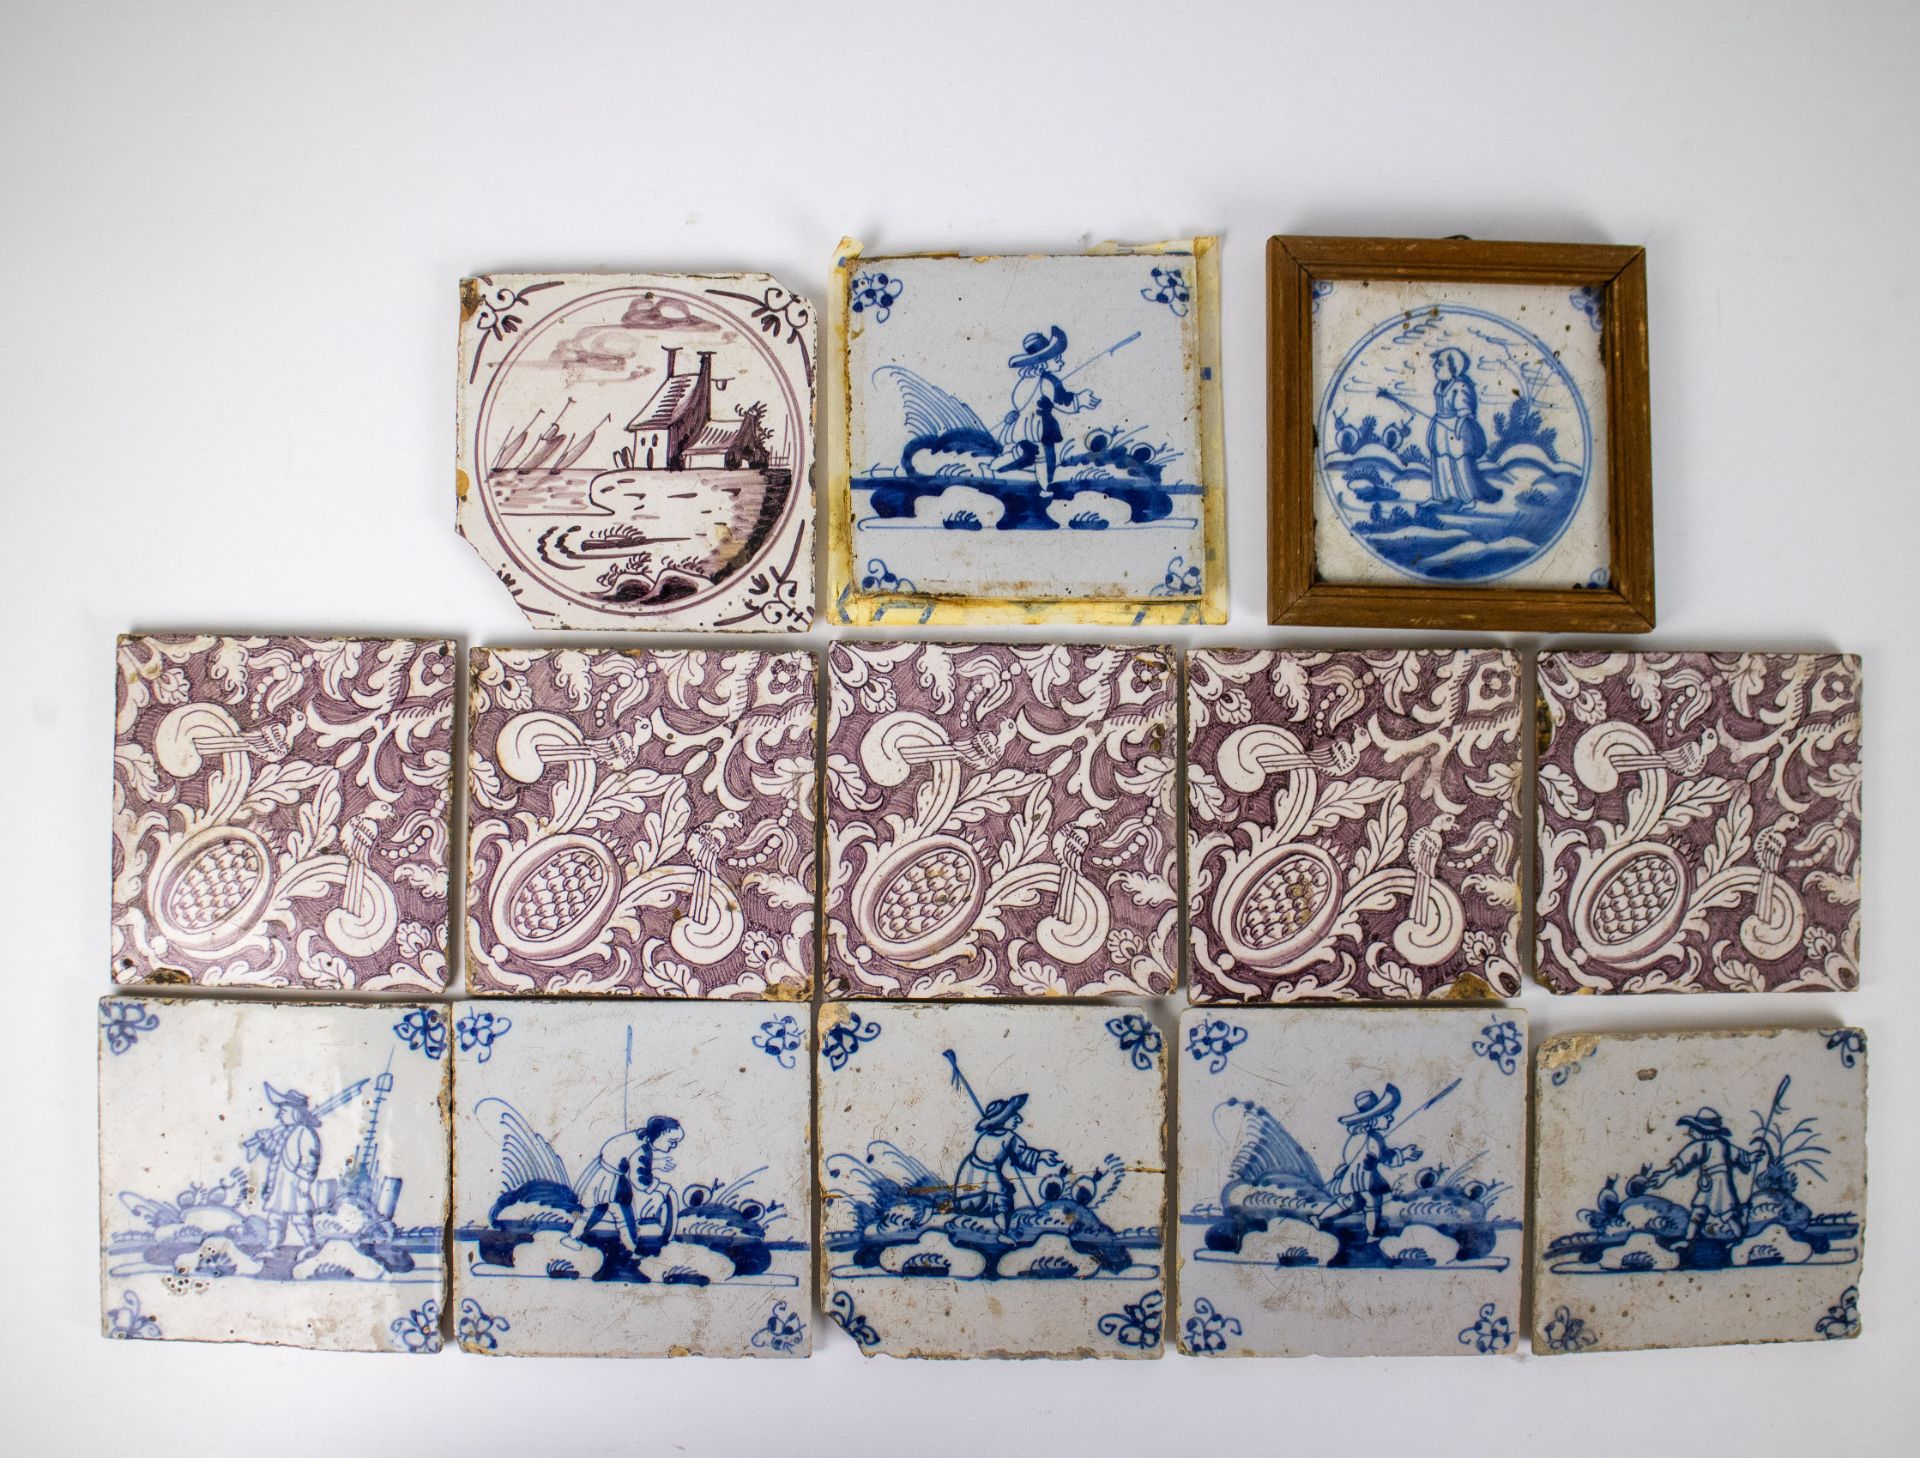 A collection of 13 Delft tiles